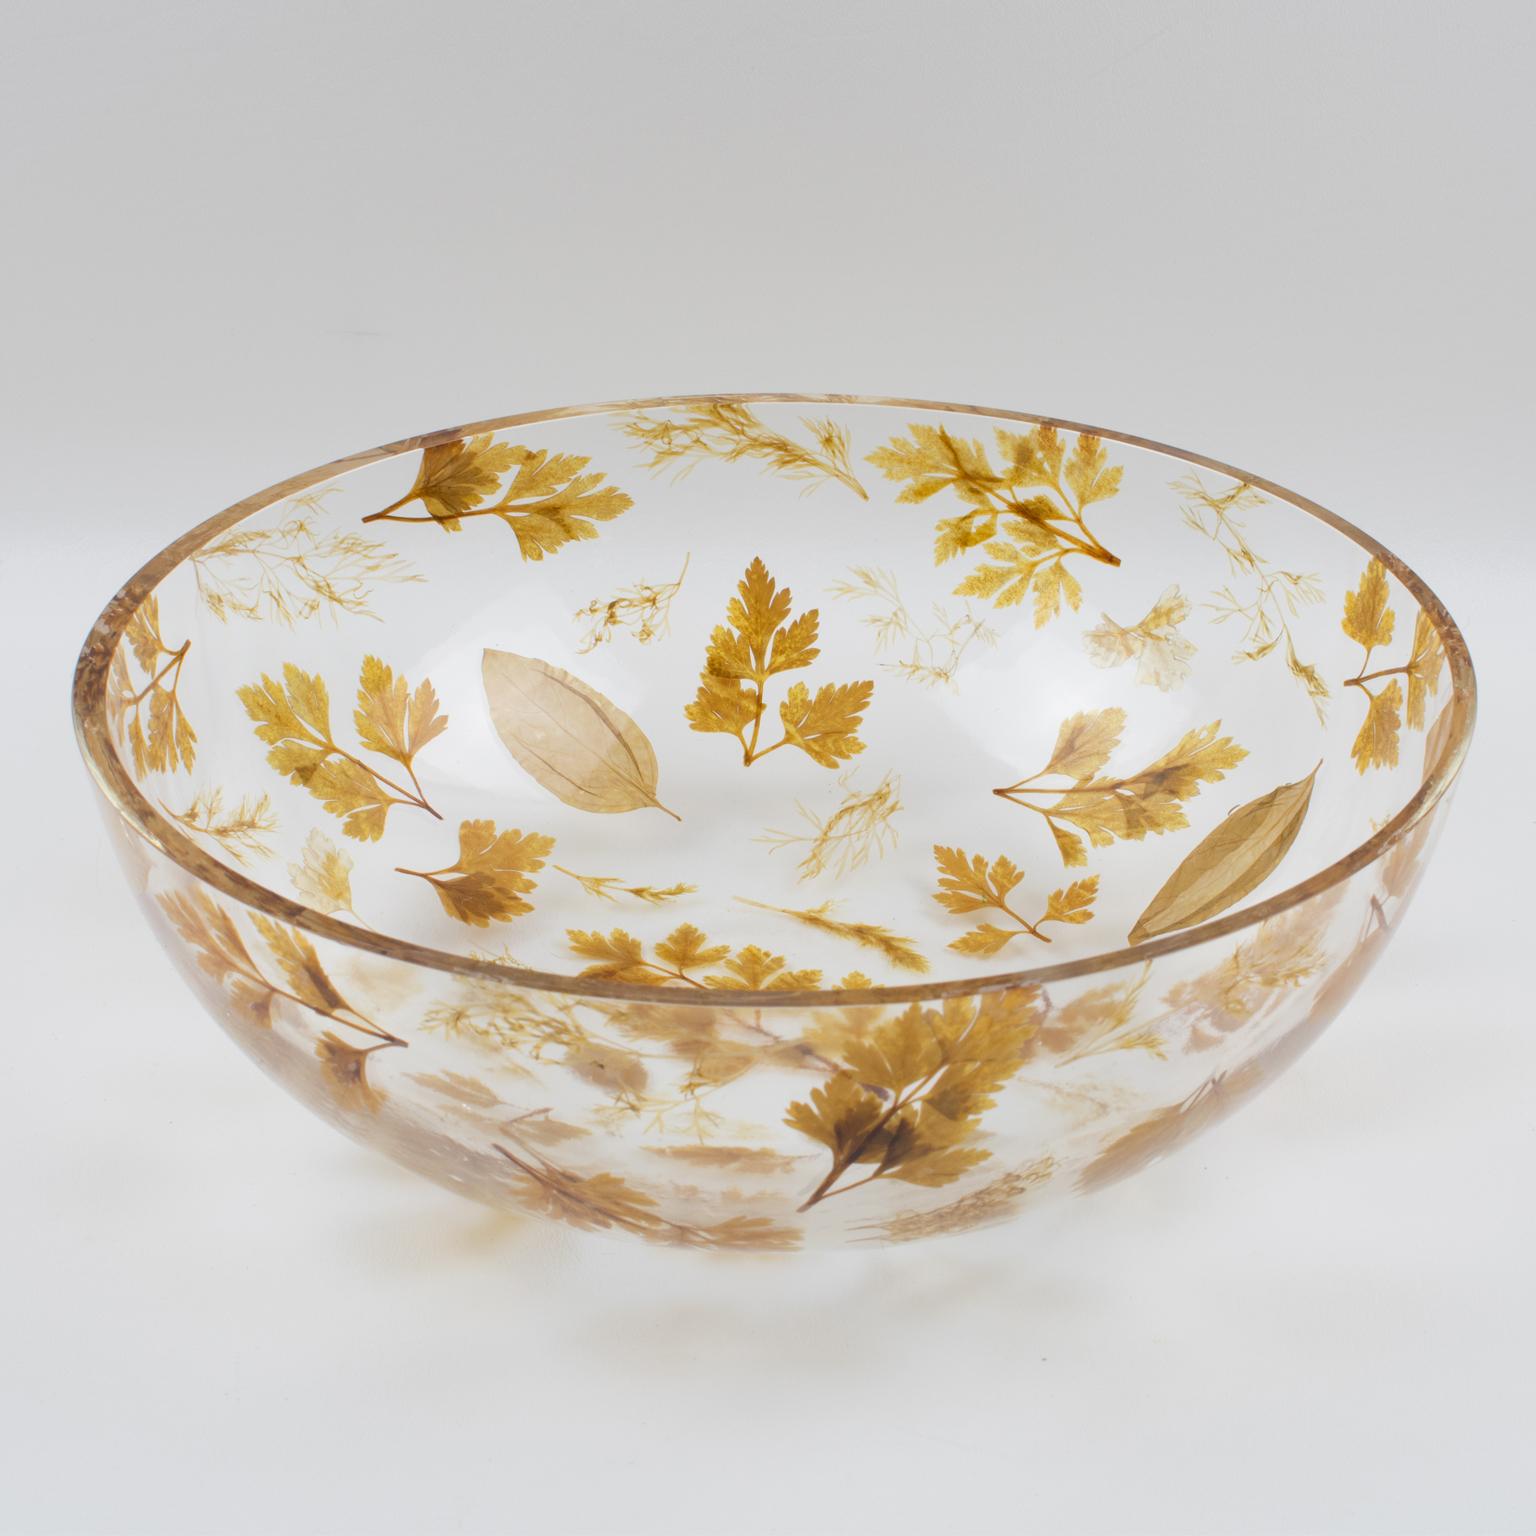 Mid-Century Modern Resin Centerpiece Serving Bowl with Leaves Inclusions, Italy 1970s